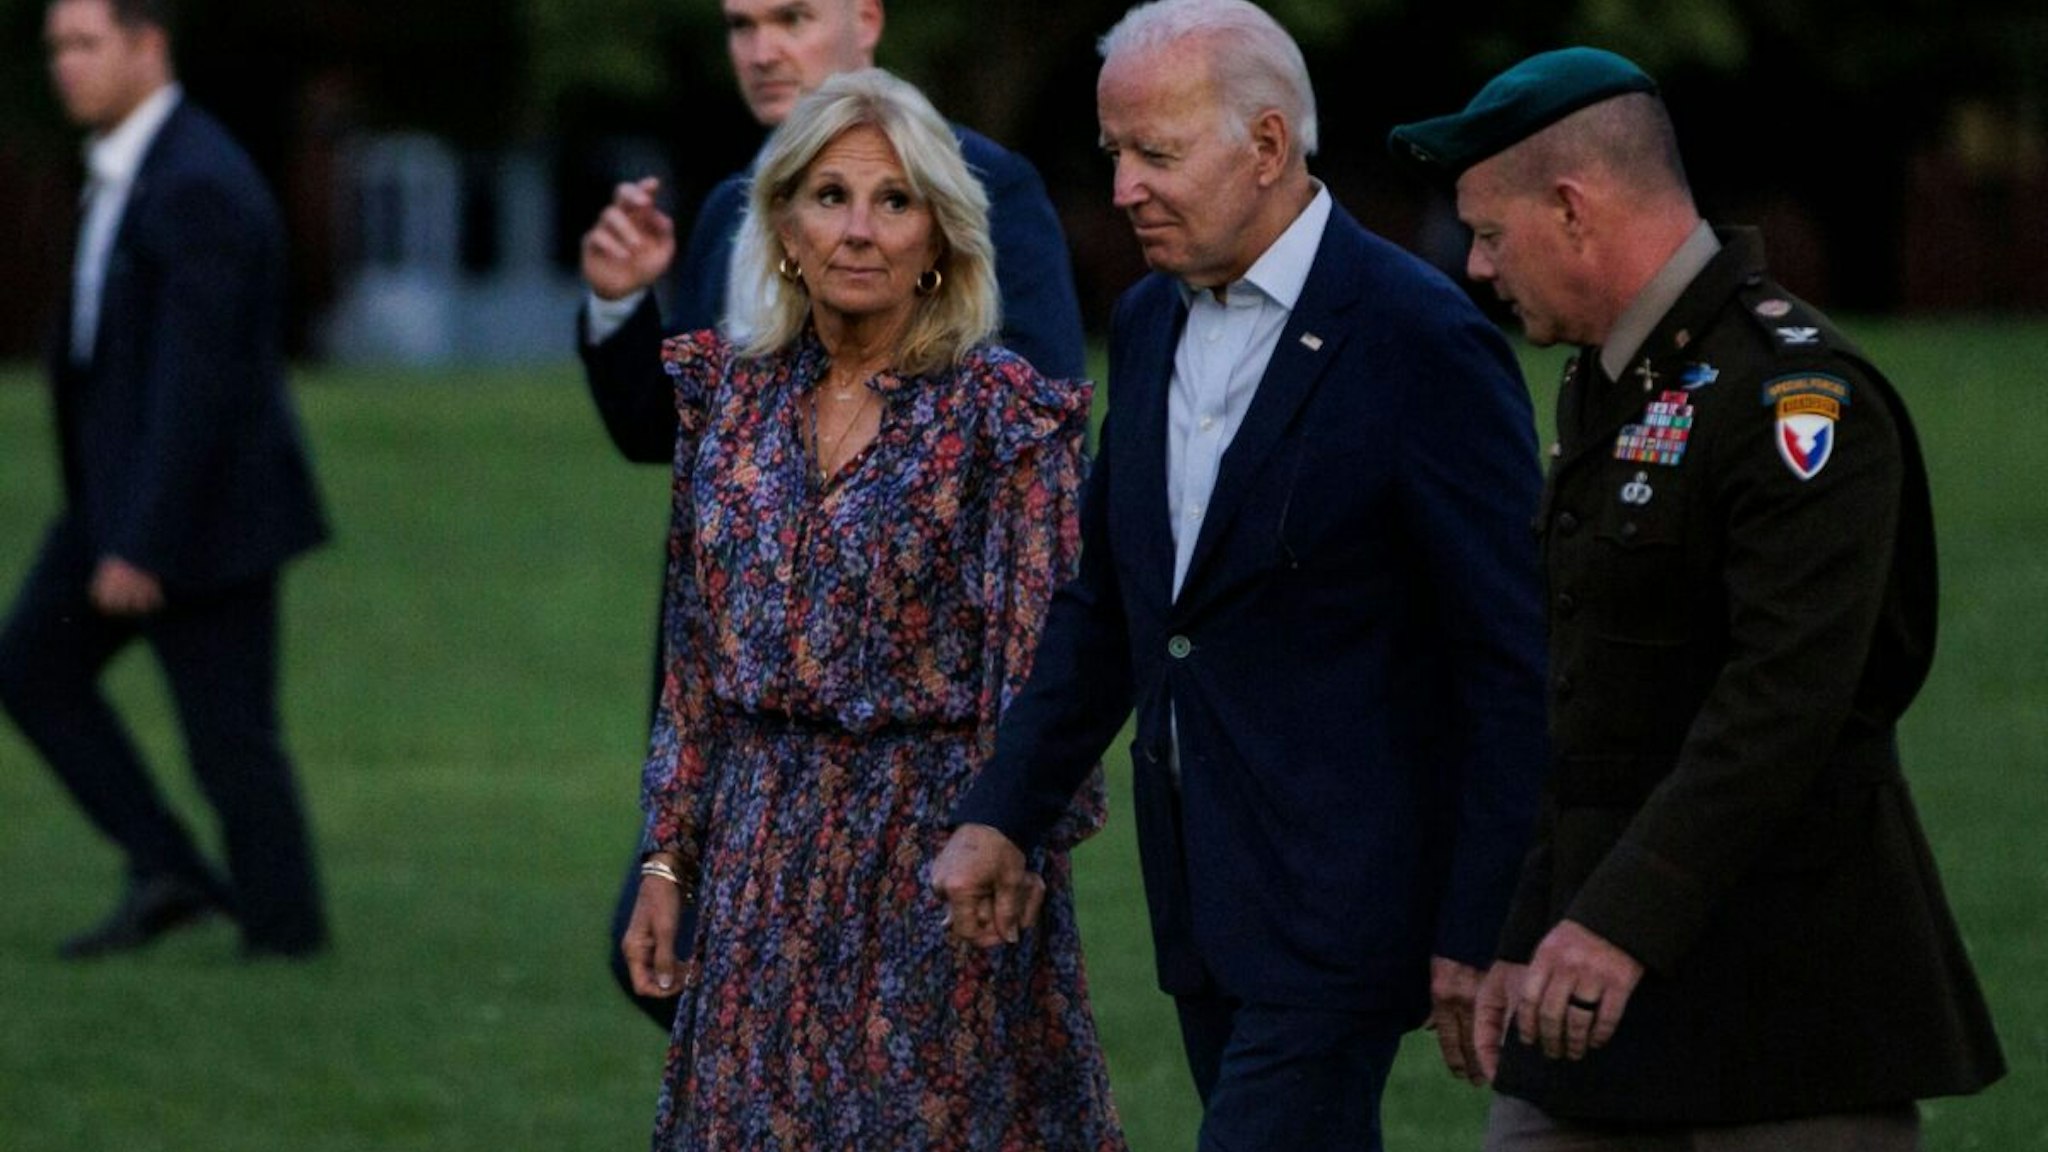 US President Joe Biden (C) and First Lady Jill Biden (L) are escorted to their vehicle by US Army Col. David Bowling at Fort McNair in Washington, DC, after spending the weekend at their vacation home in Rehoboth, Delaware on July 10, 2022.